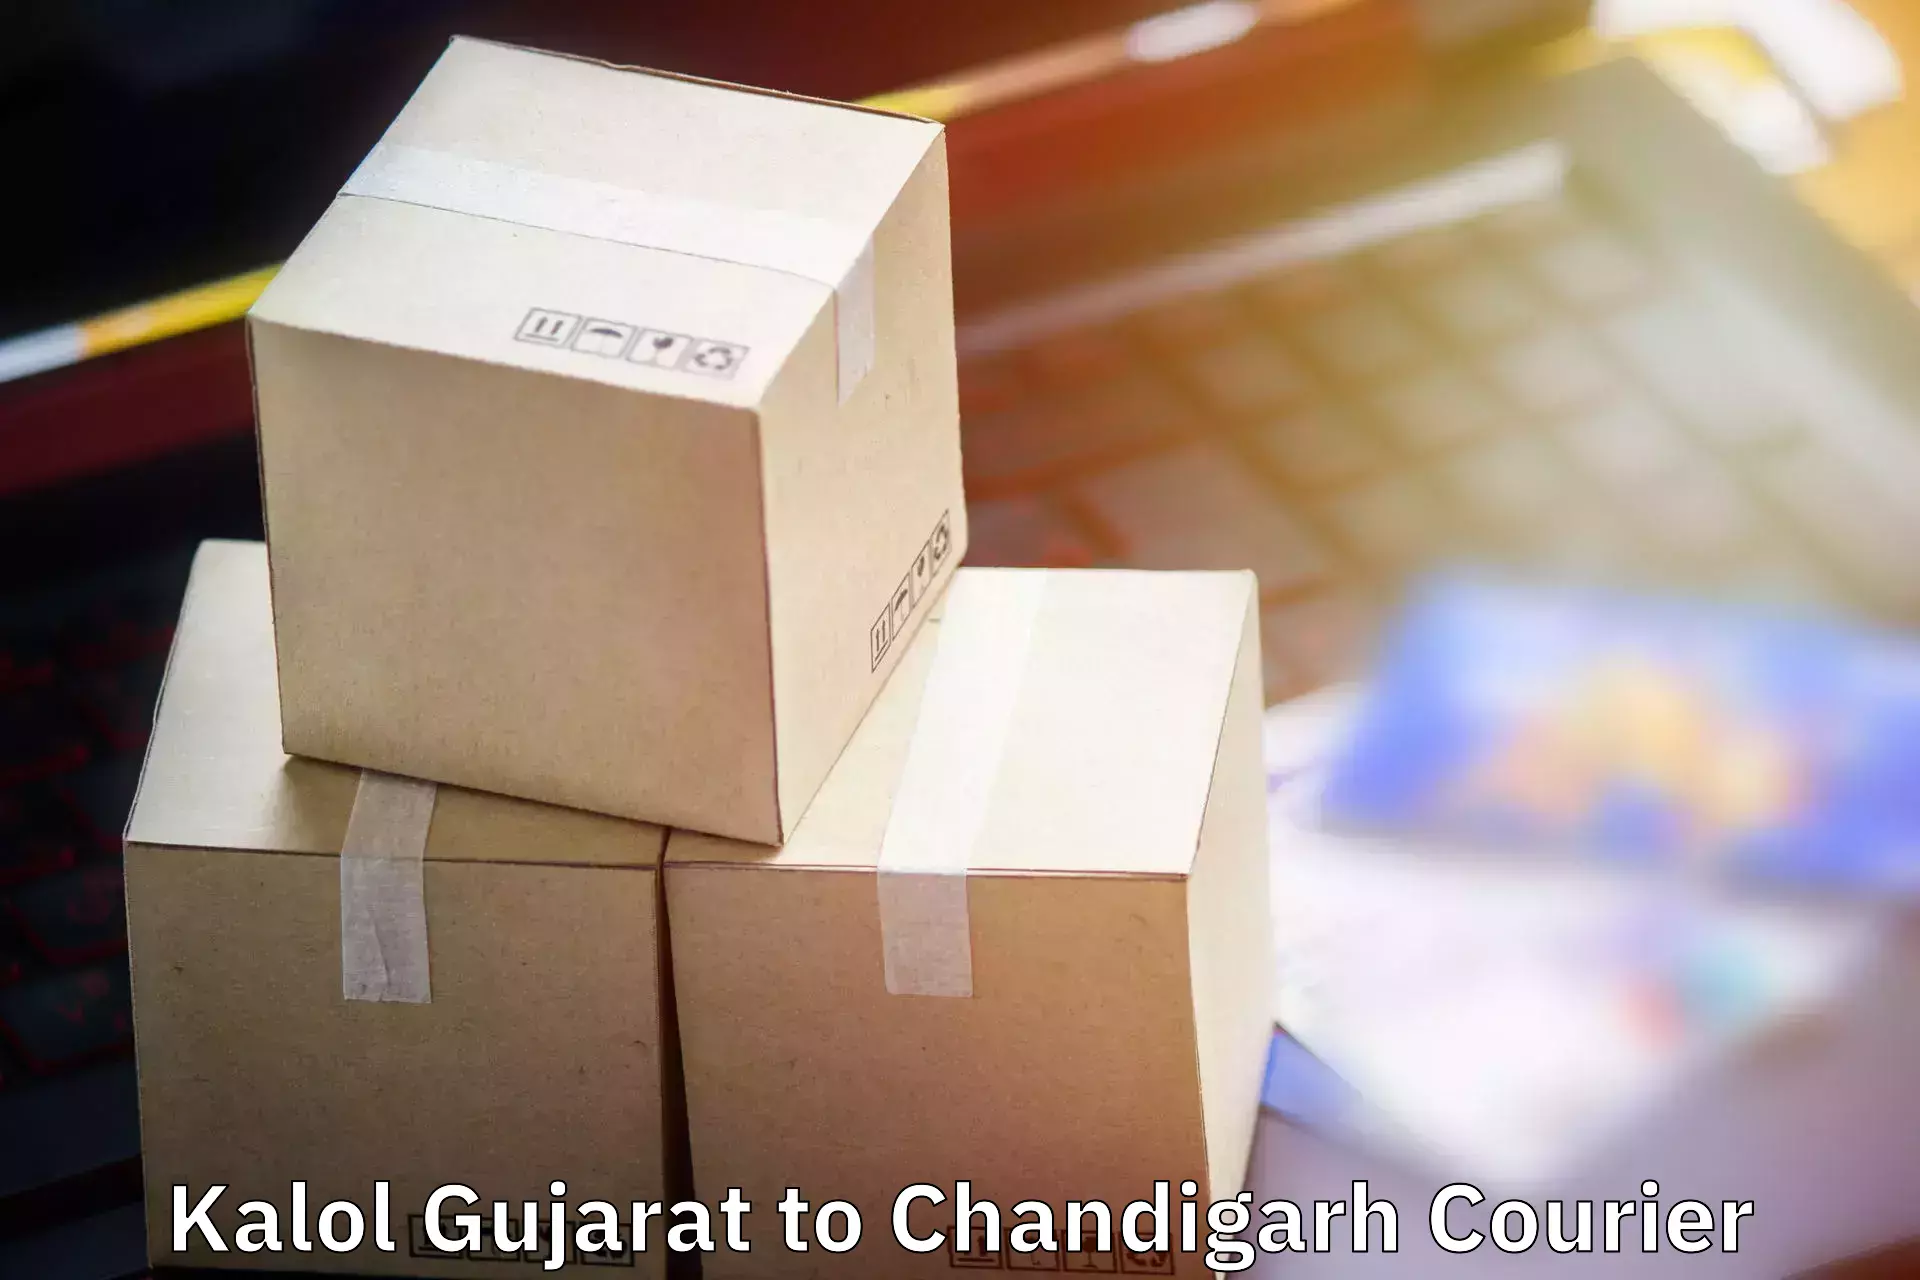 Luggage delivery network Kalol Gujarat to Chandigarh